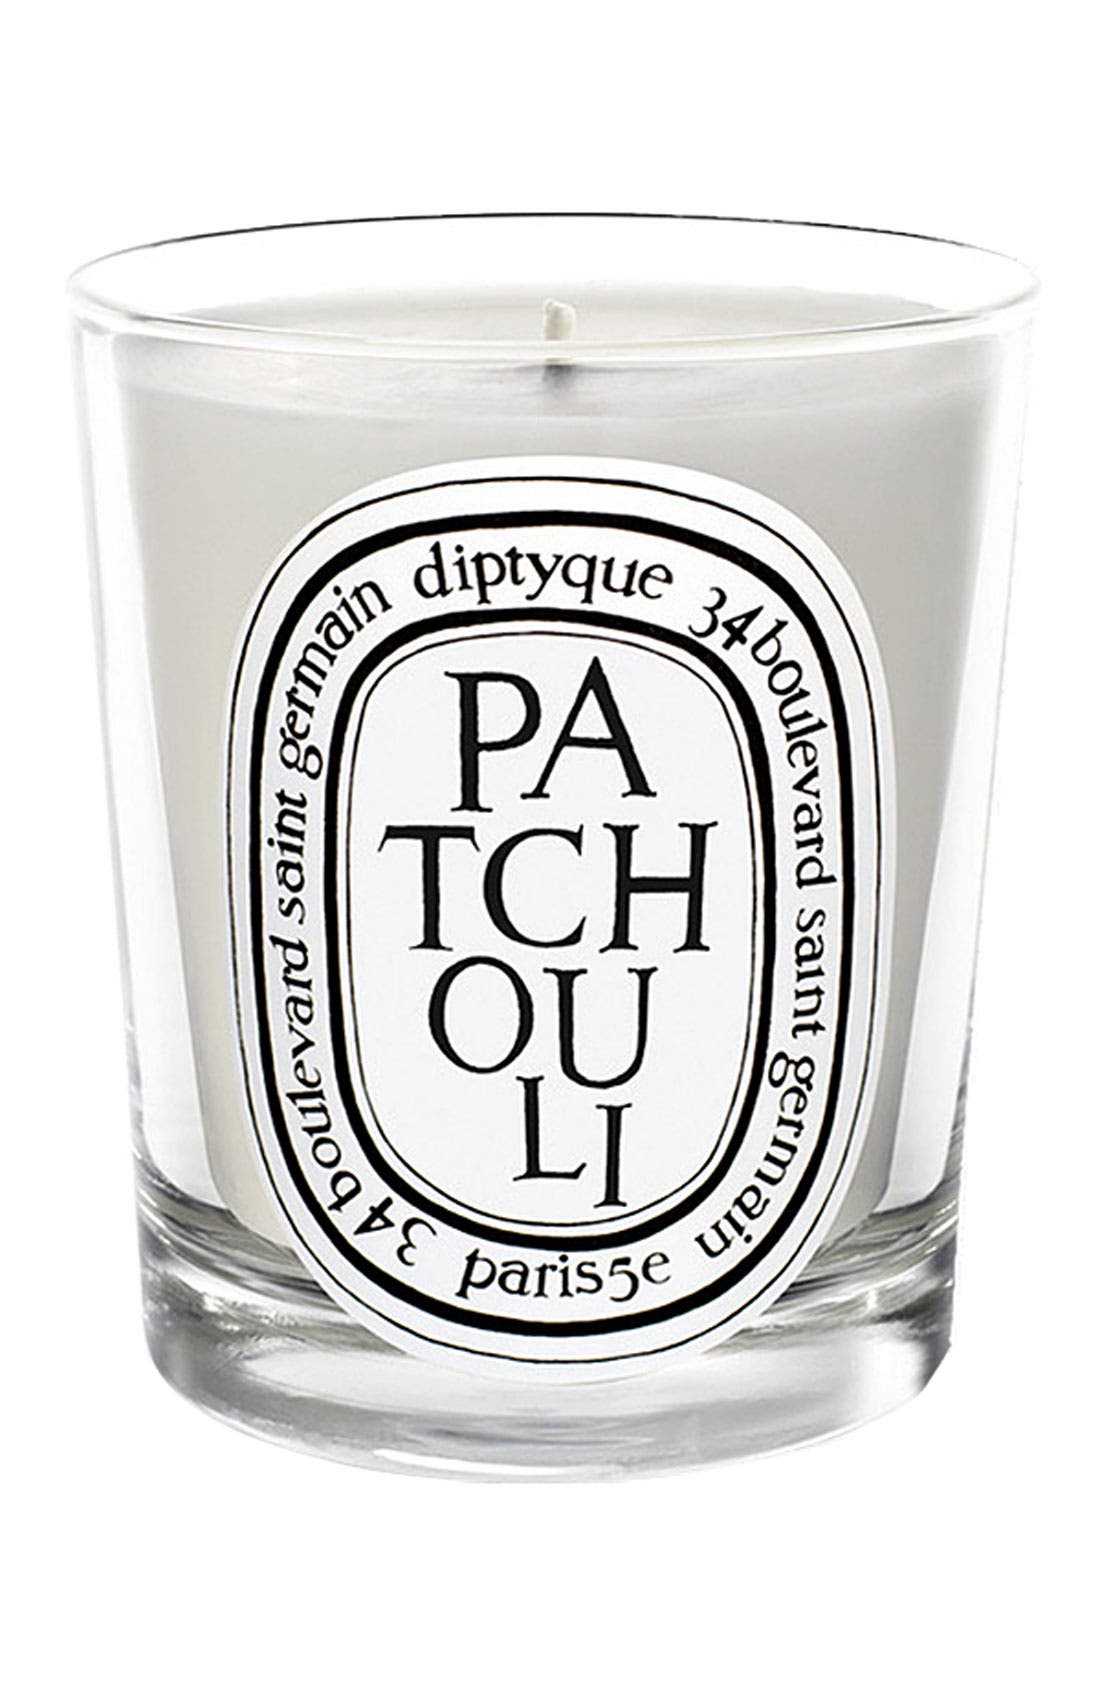 Diptyque OUD Scented Candle 1.23 oz 35g Mini Brand New 